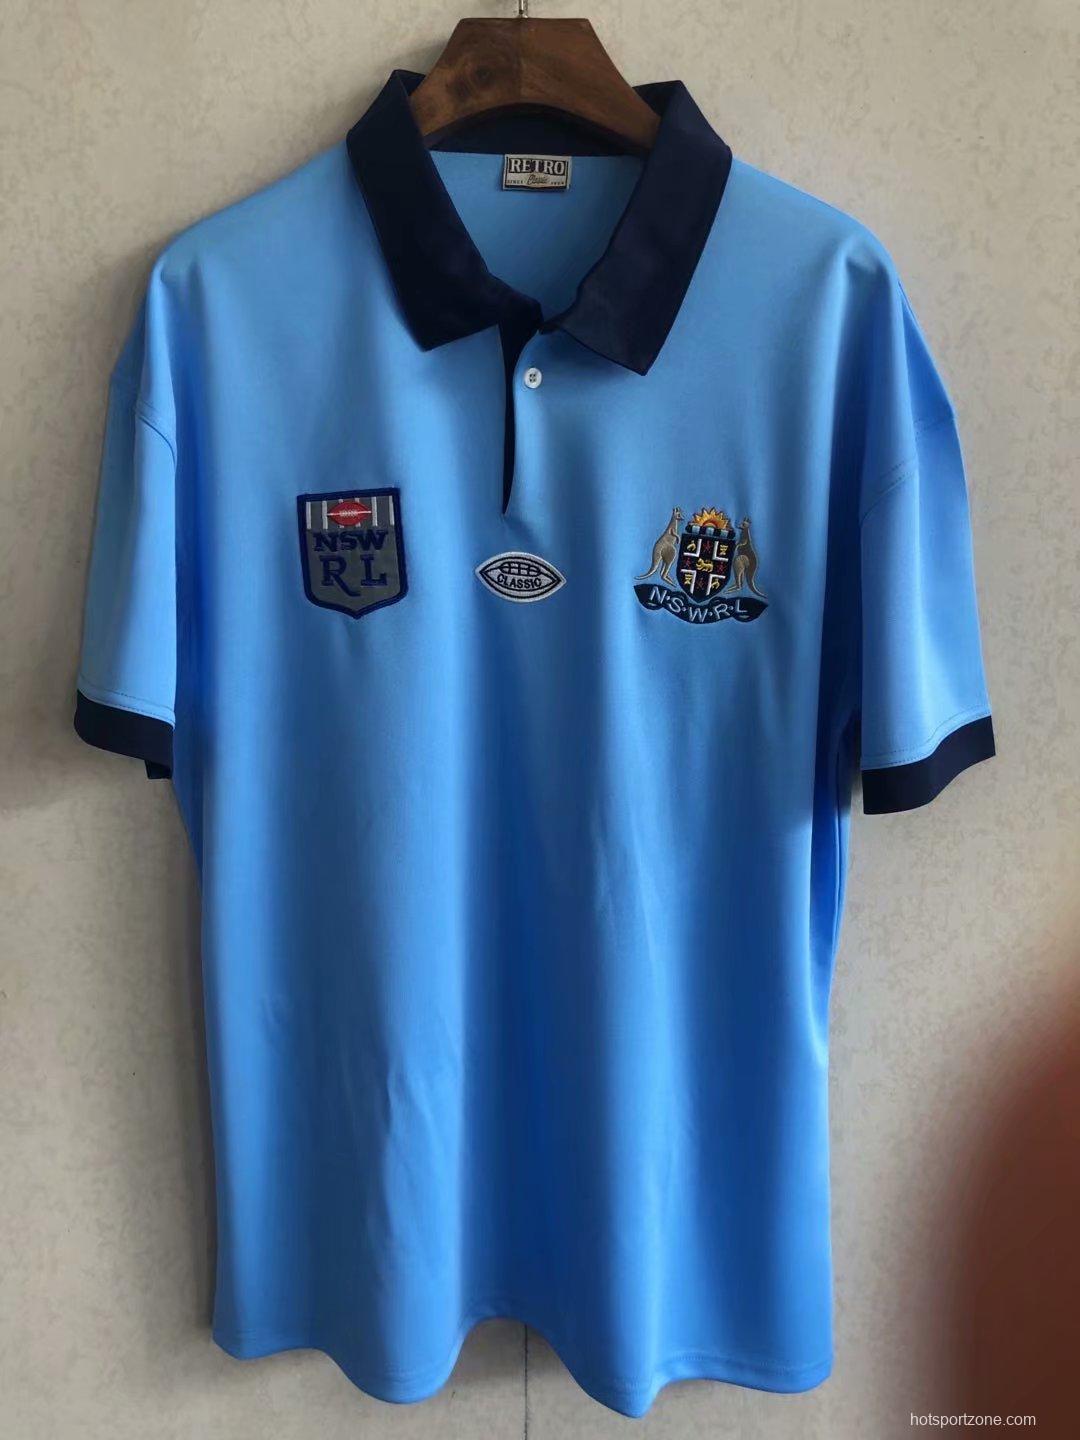 NSW Blues 1985 Men's Retro Rugby Jersey